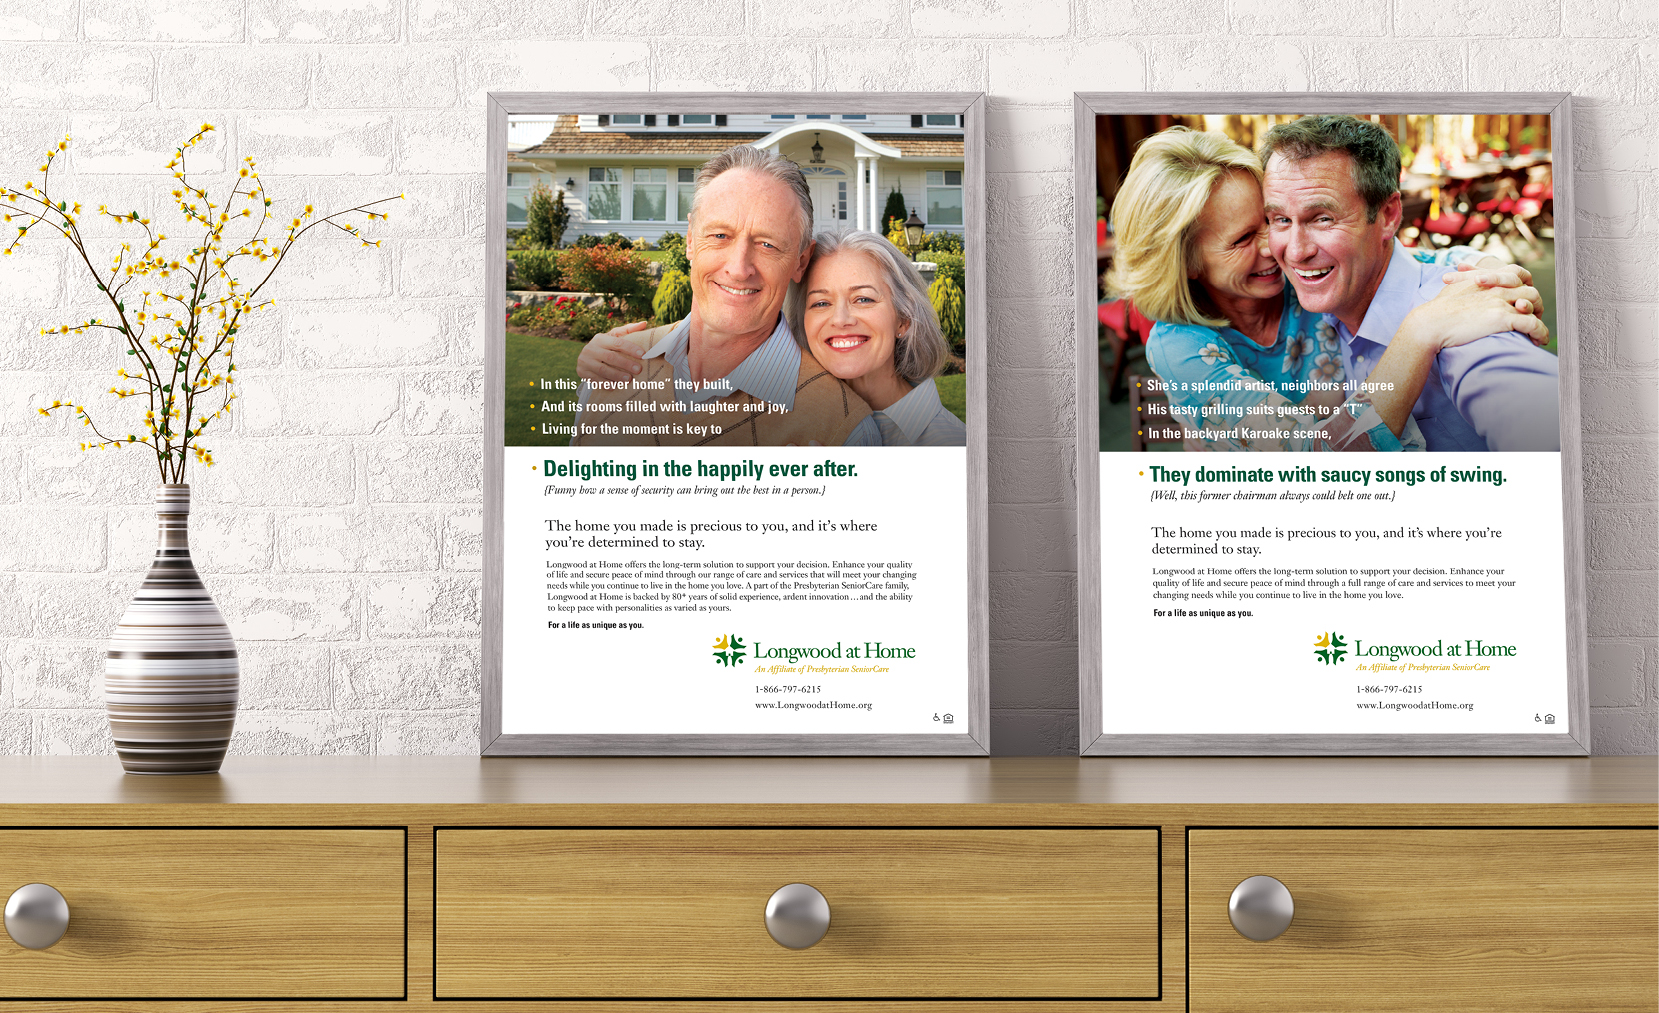 Print ads for Longwood at Home